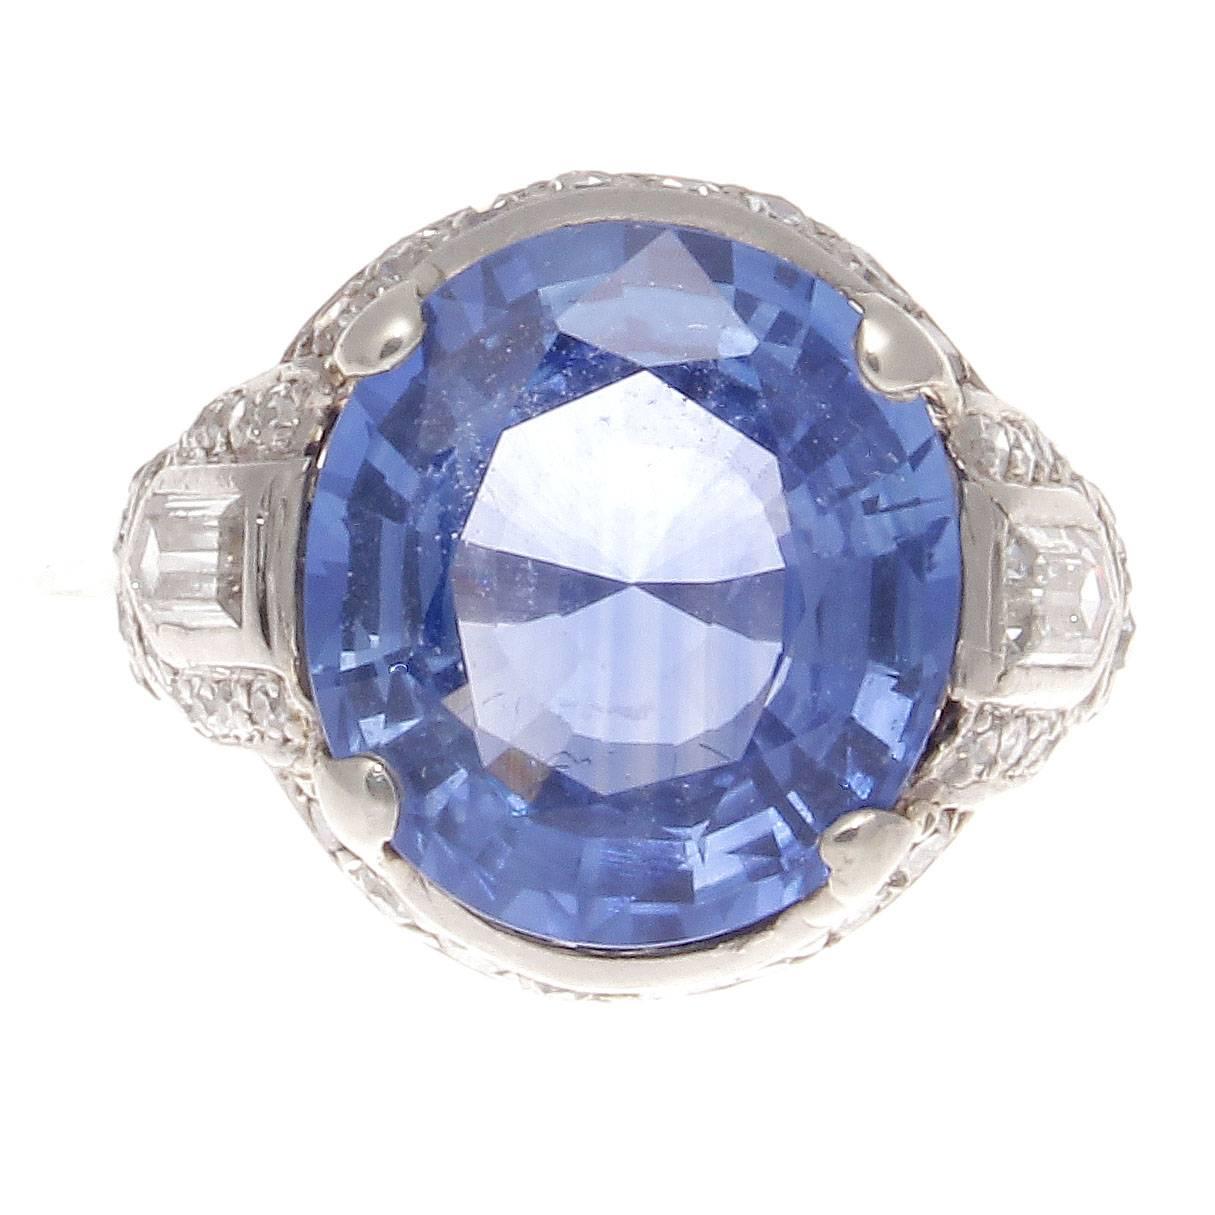 When a dream becomes reality. This architecturally finely created piece of jewelry en-captures the beauty of the 1930's, the Art Deco time period. Featuring a 7.56 carat sapphire that radiates the cornflower blue that the Sri Lanka region is famous